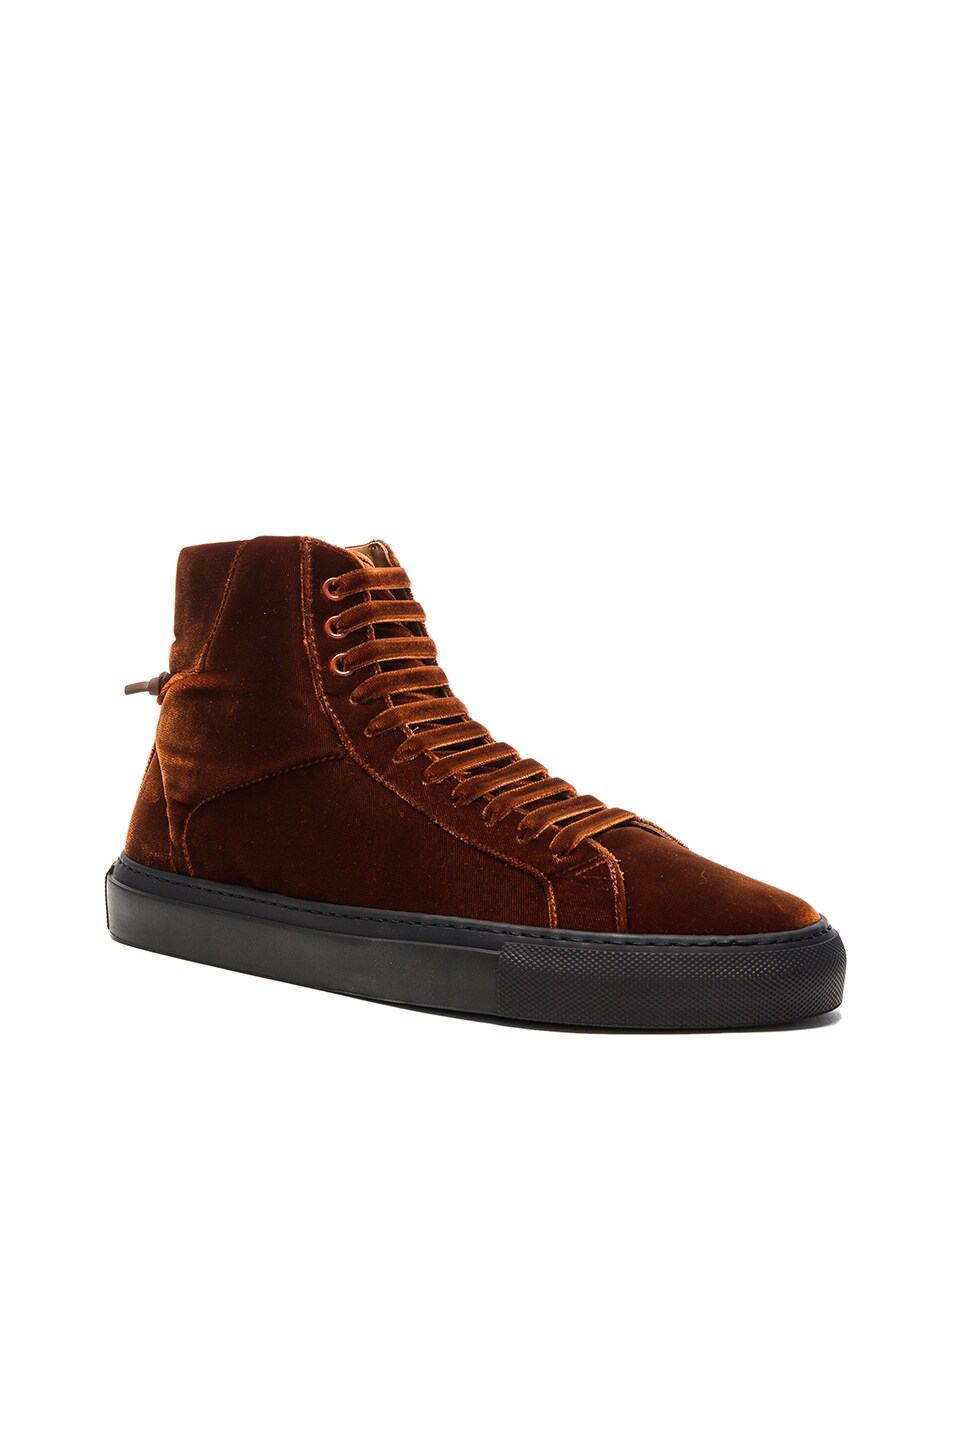 Image 1 of Givenchy Knots Urban High Velvet Sneakers in Hazel